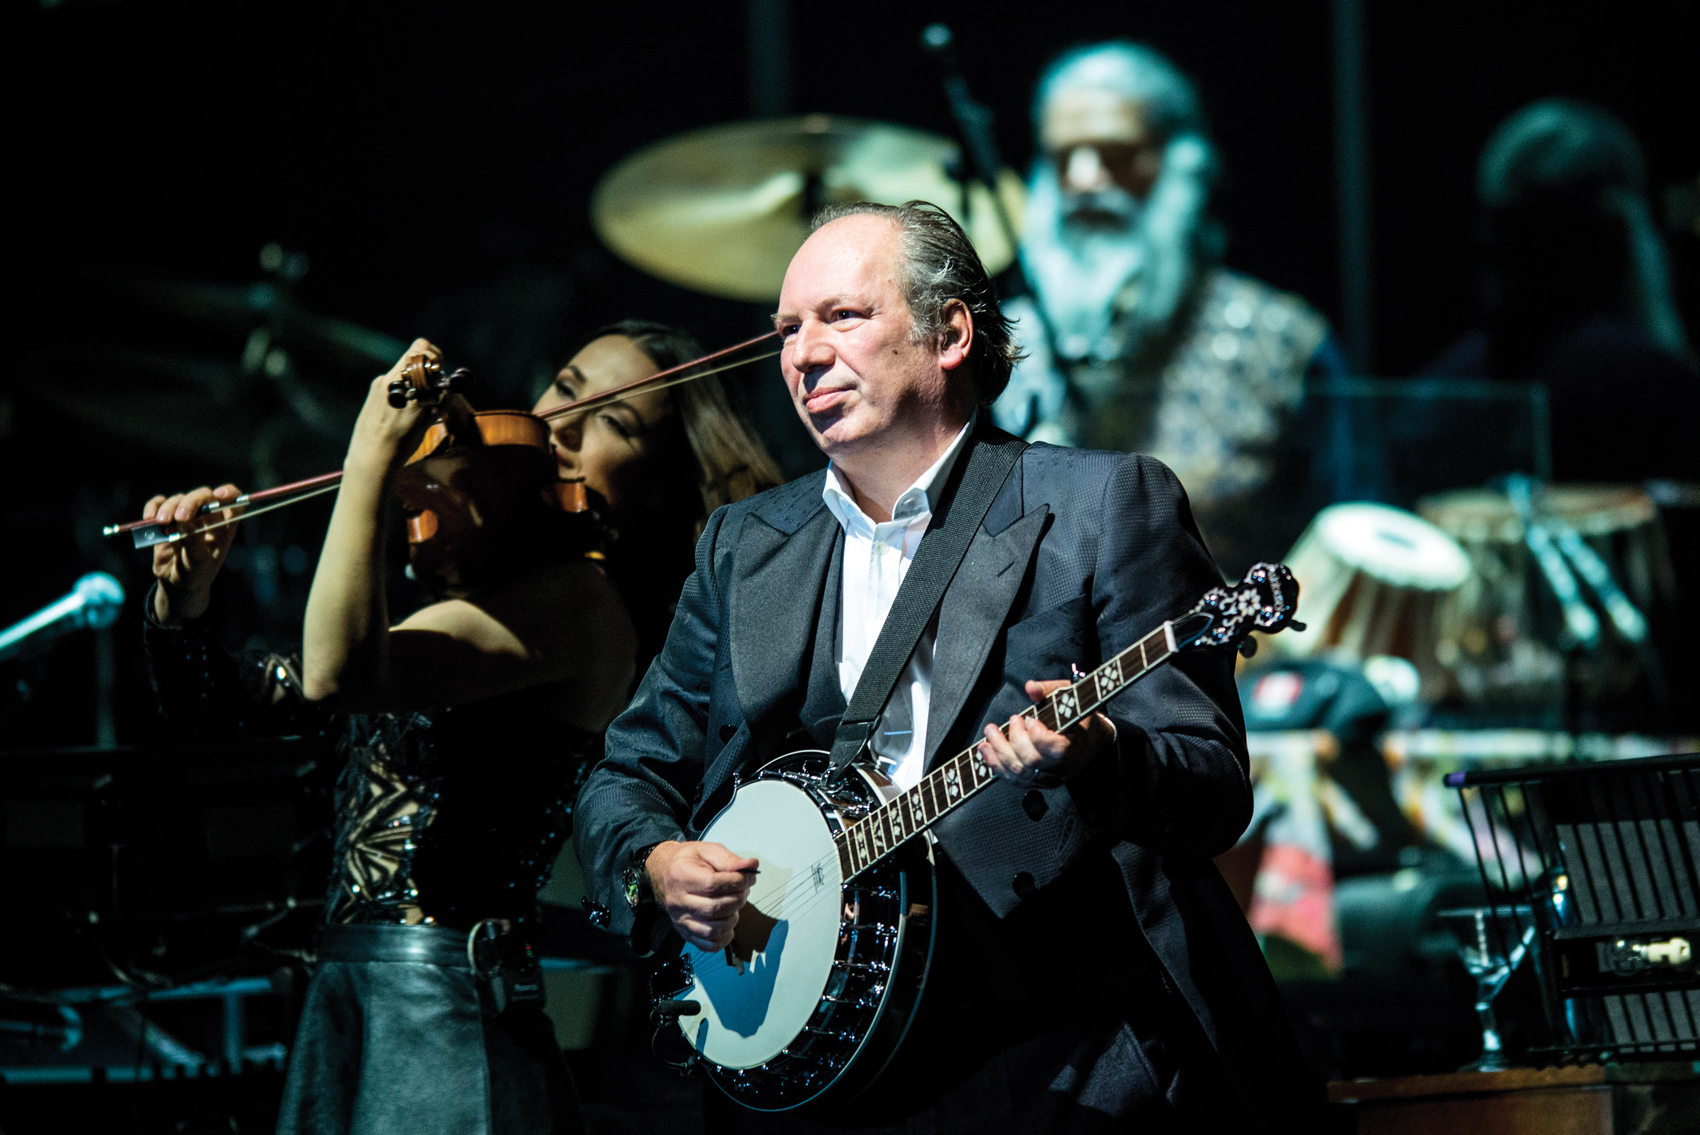 Hans Zimmer steps out from behind the screen - Las Vegas Weekly